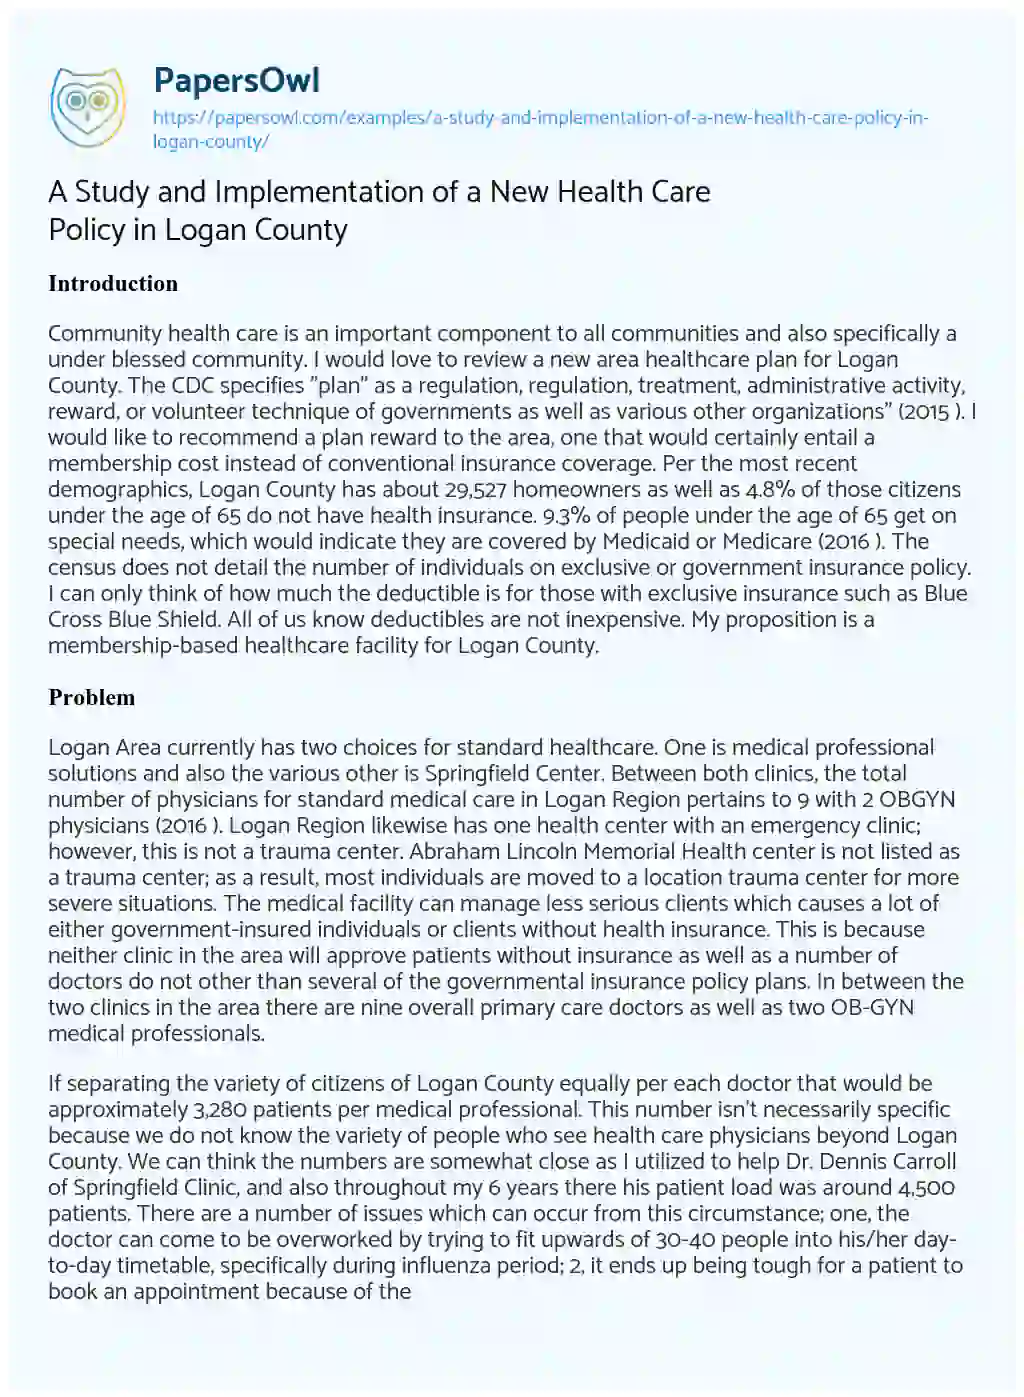 Essay on A Study and Implementation of a New Health Care Policy in Logan County